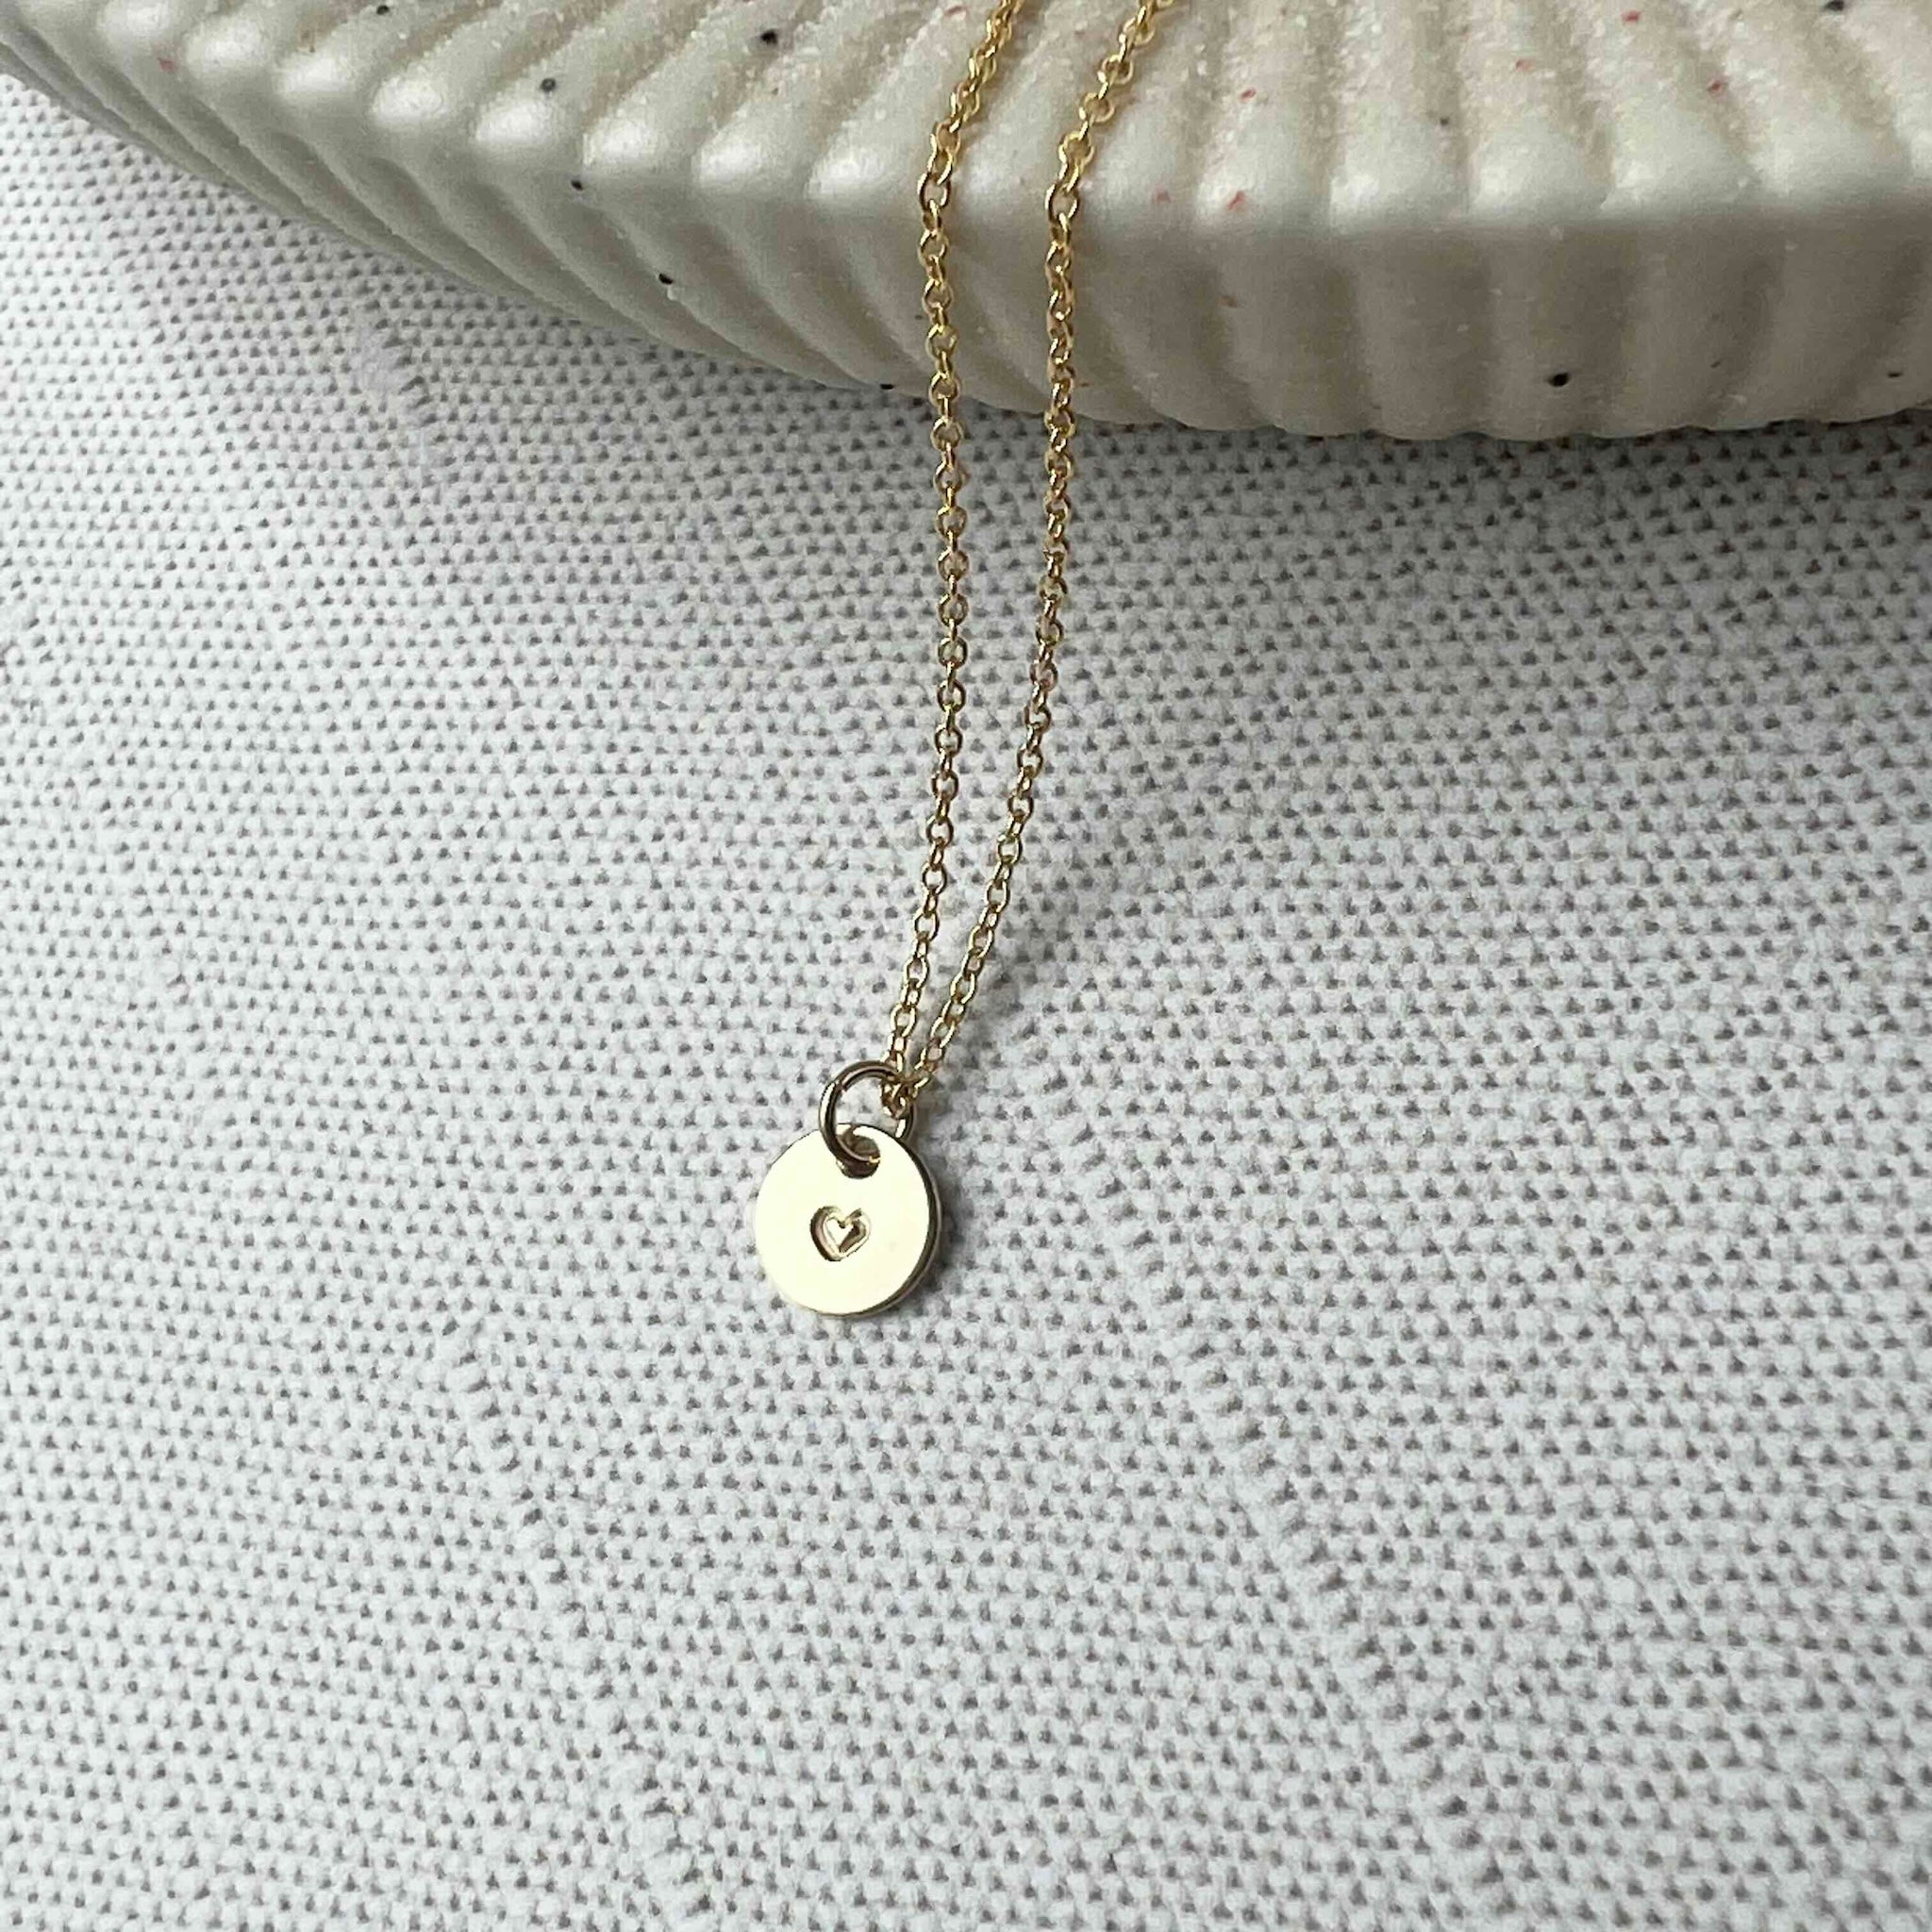 Initial Necklace Sterling Silver Monogram Necklace Bridesmaid Gift  Bridesmaid Jewelry Dainty Personalized Necklace Stamped Letter Necklace